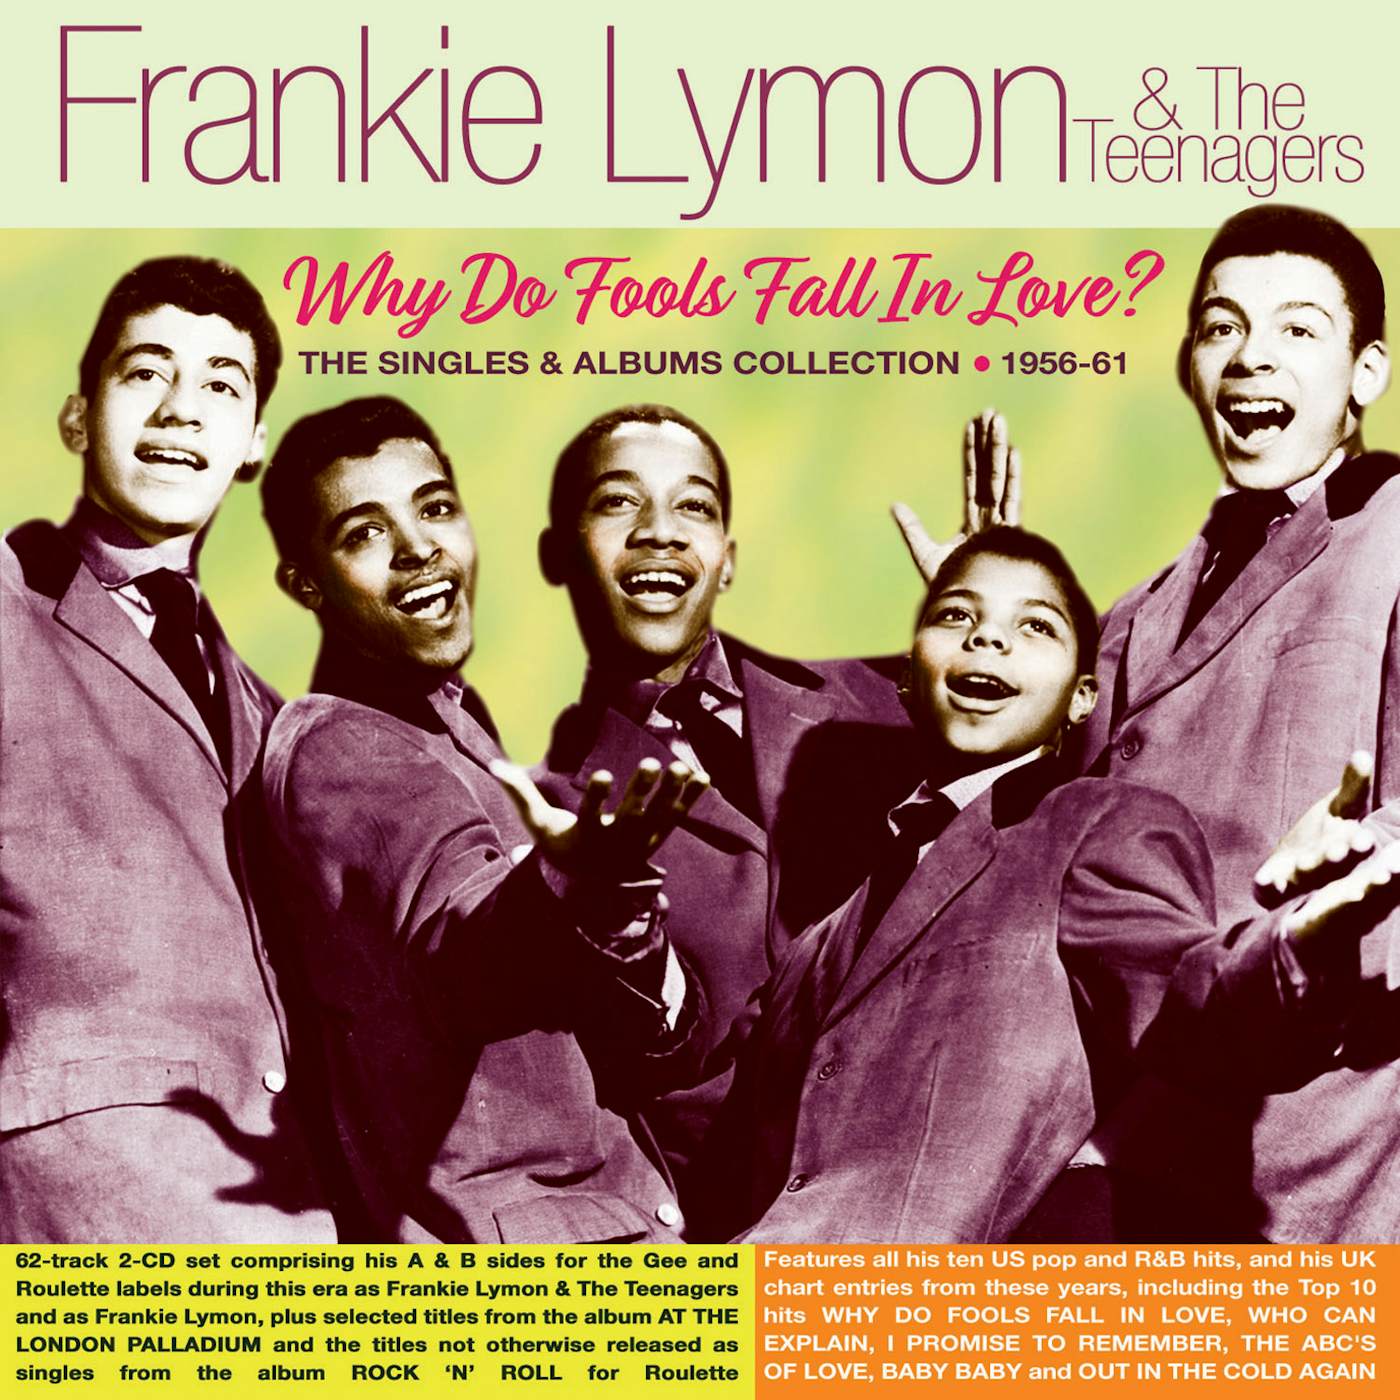 Frankie Lymon & The Teenagers WHY DO FOOLS FALL IN LOVE? THE SINGLES & ALBUMS COLLECTION 1956-61 CD